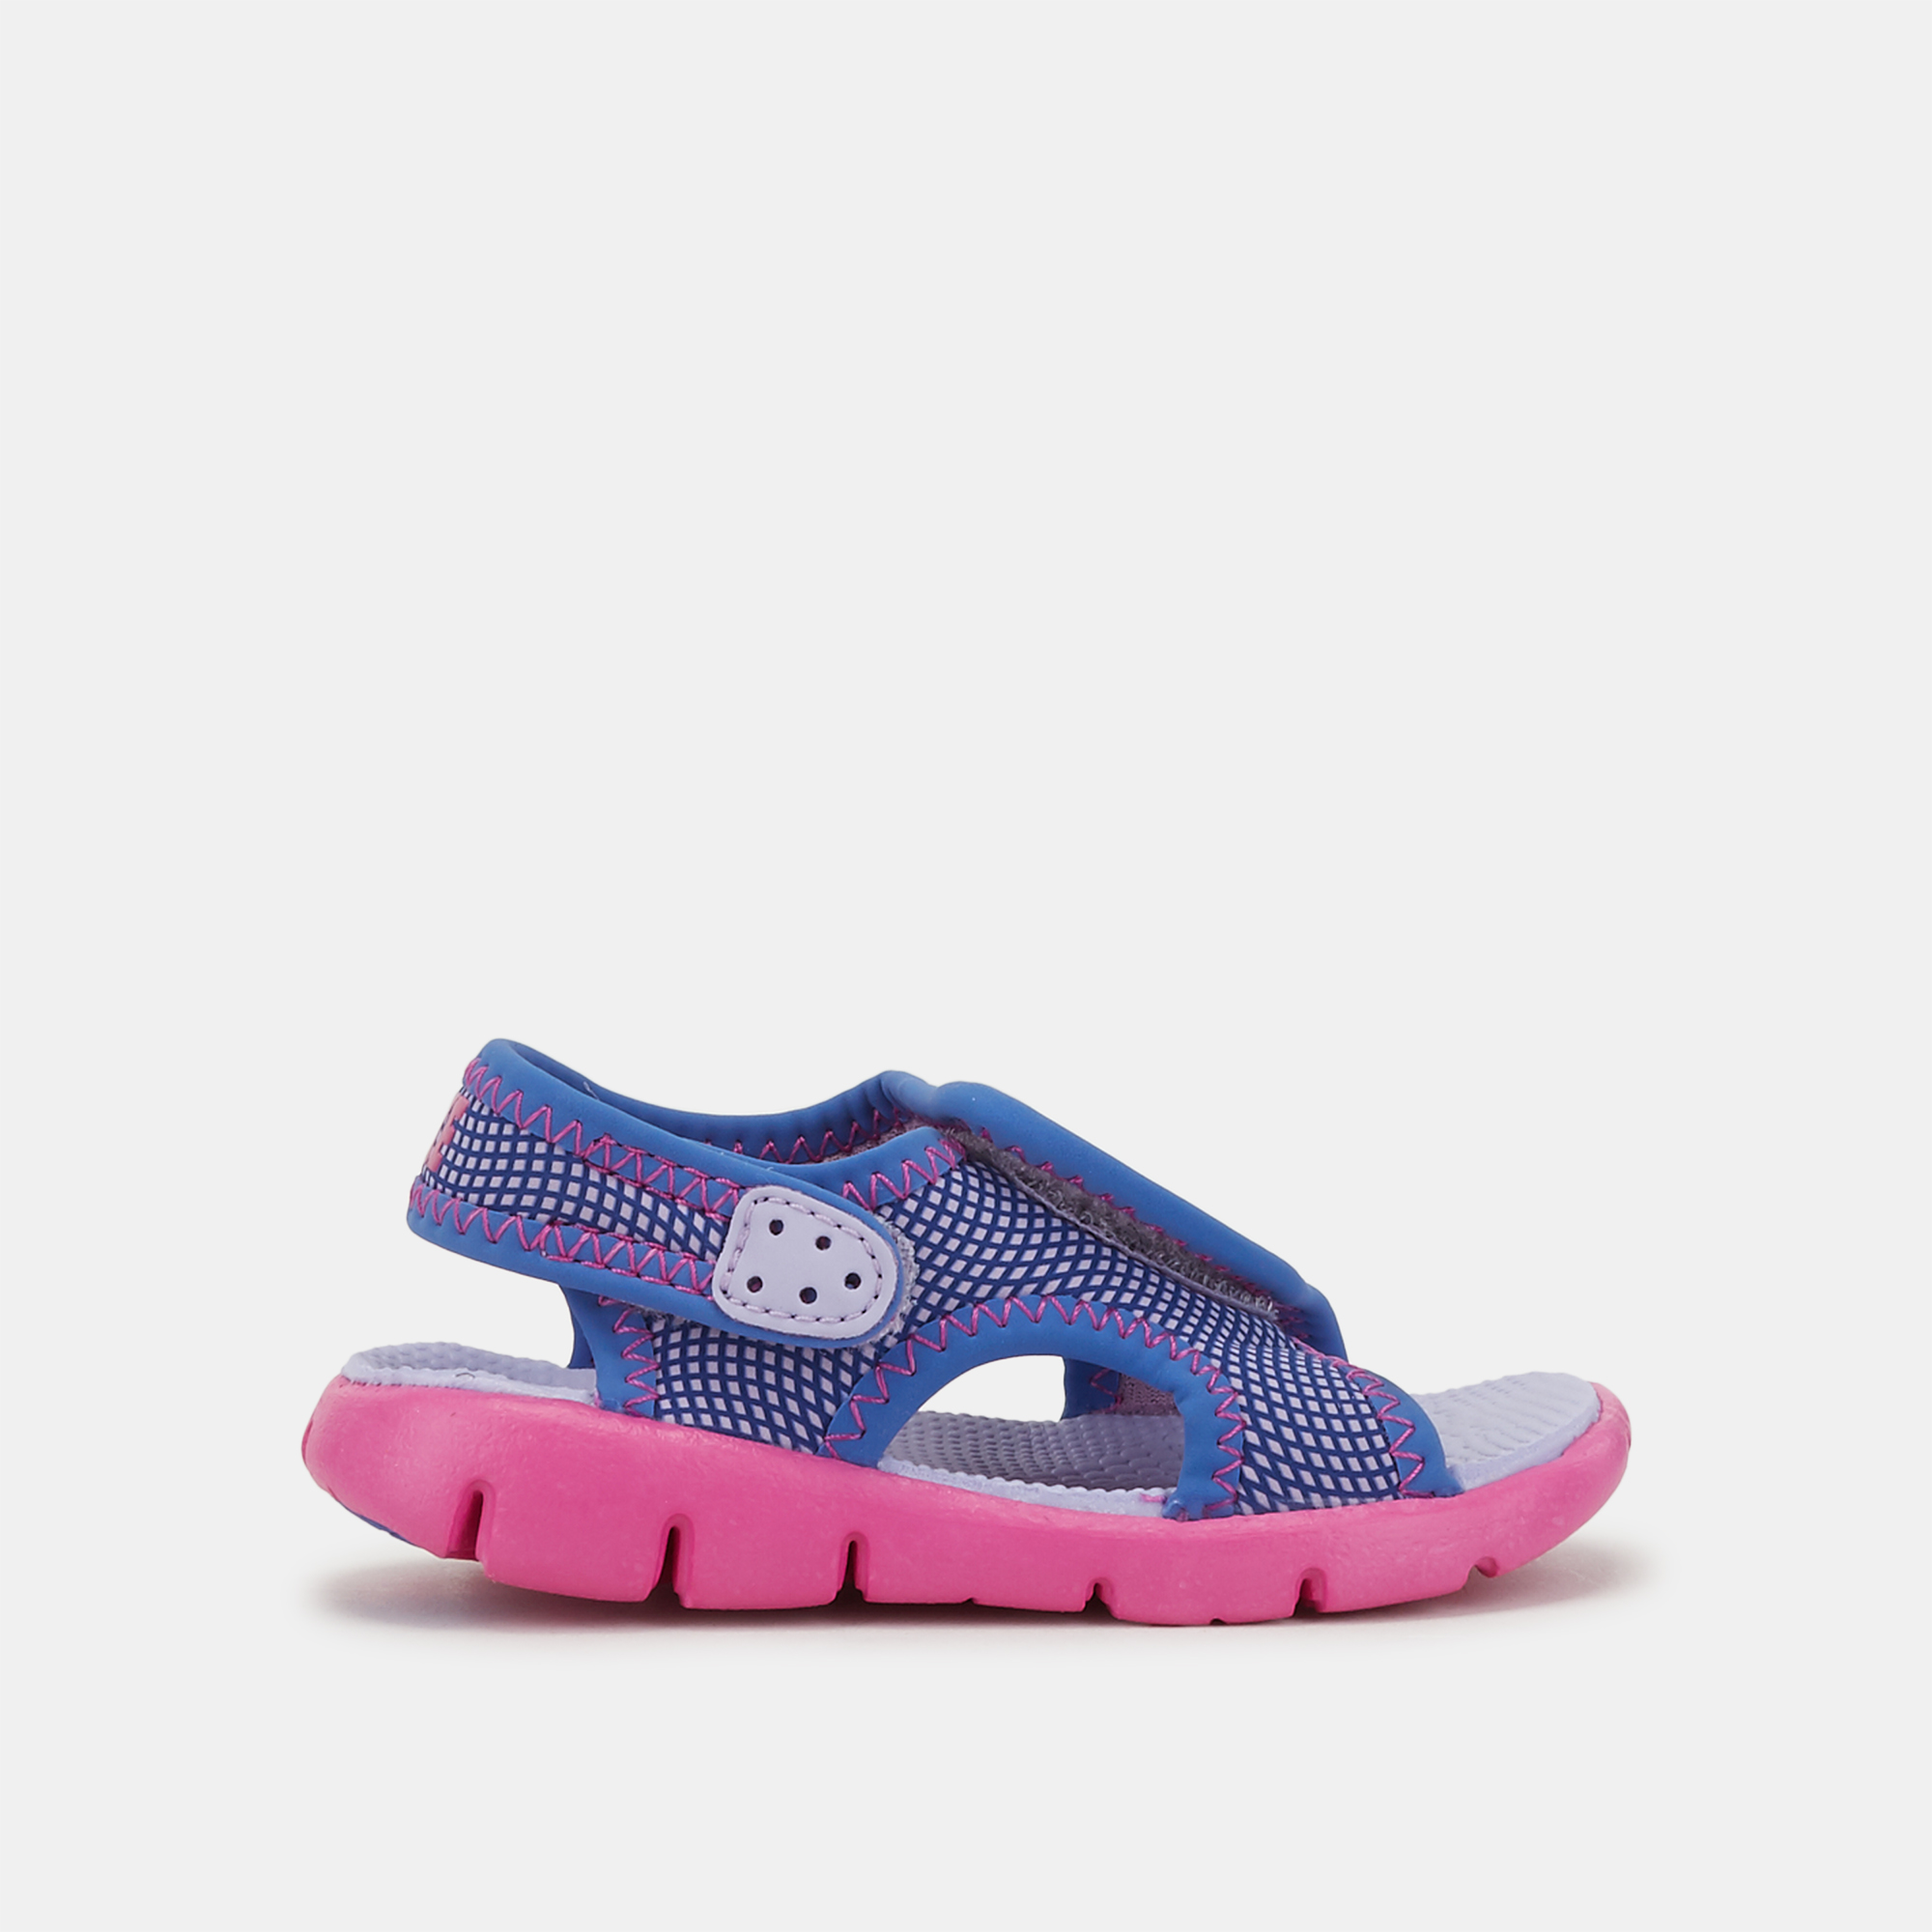  Nike  Kids Sunray Adjust 4 Sandals  Baby and Toddler  